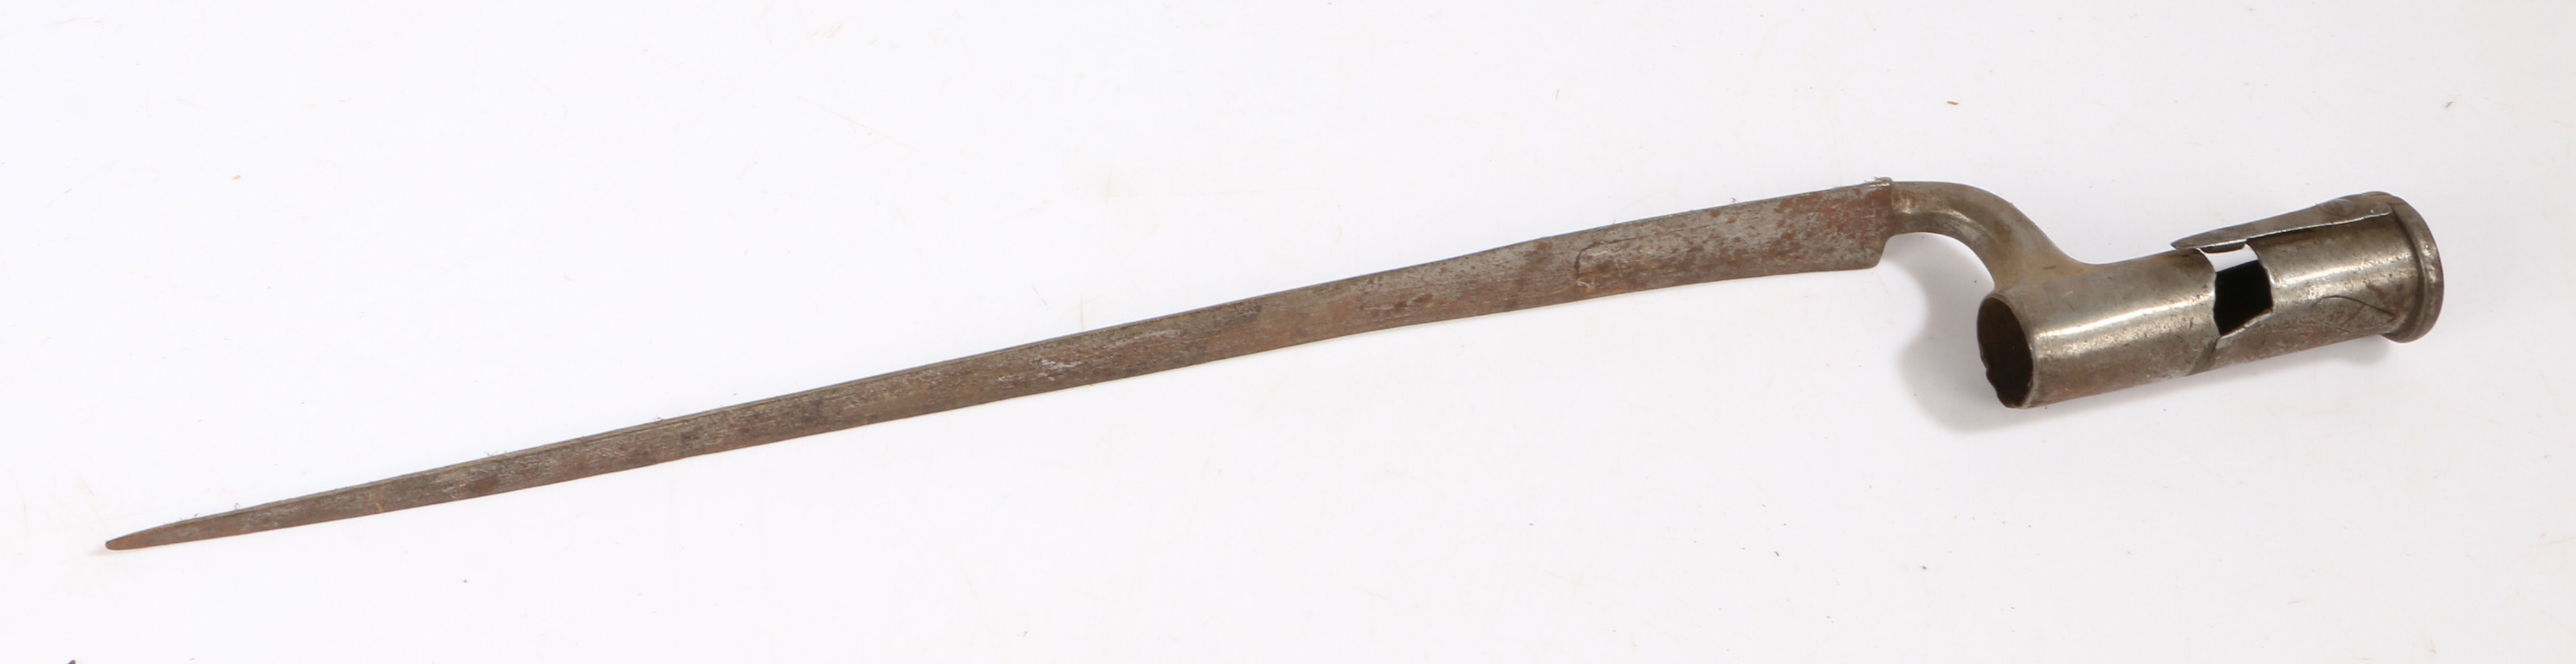 Late 18th century Brown Bess Socket Bayonet with East India Company Quartered Heart marking to - Image 2 of 5